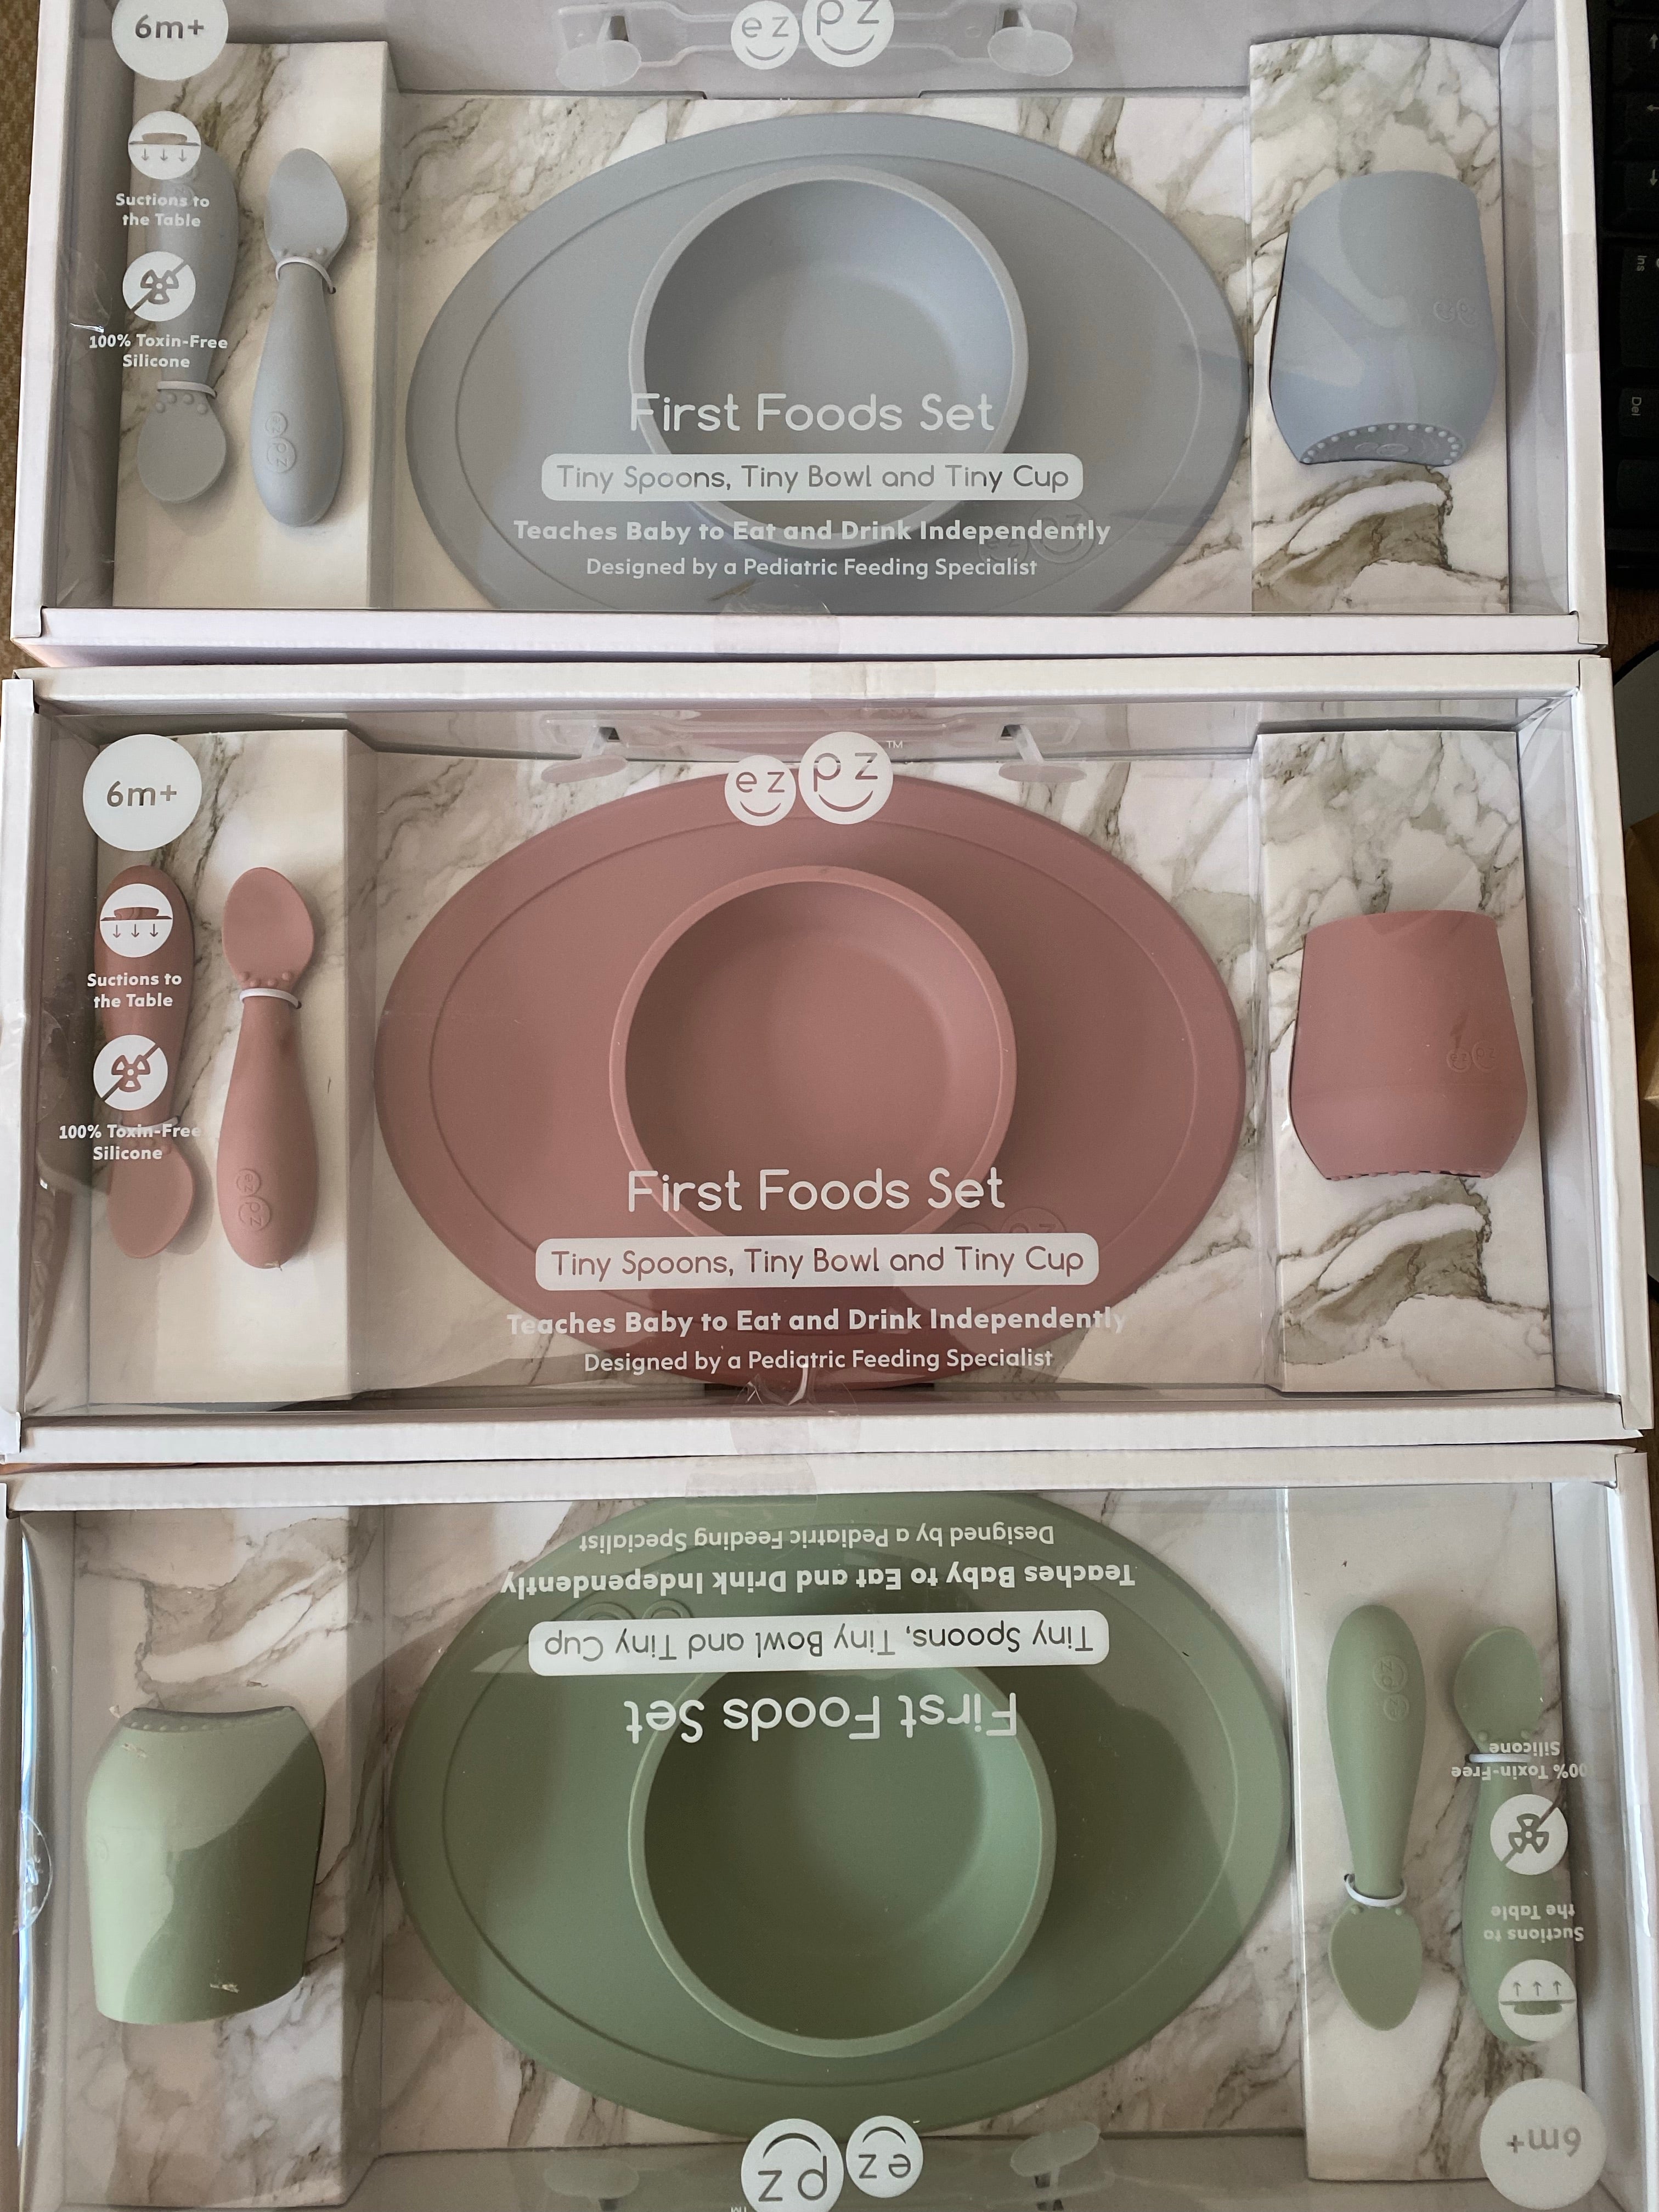 First Foods Set by Ezpz – The Elephant In A Box